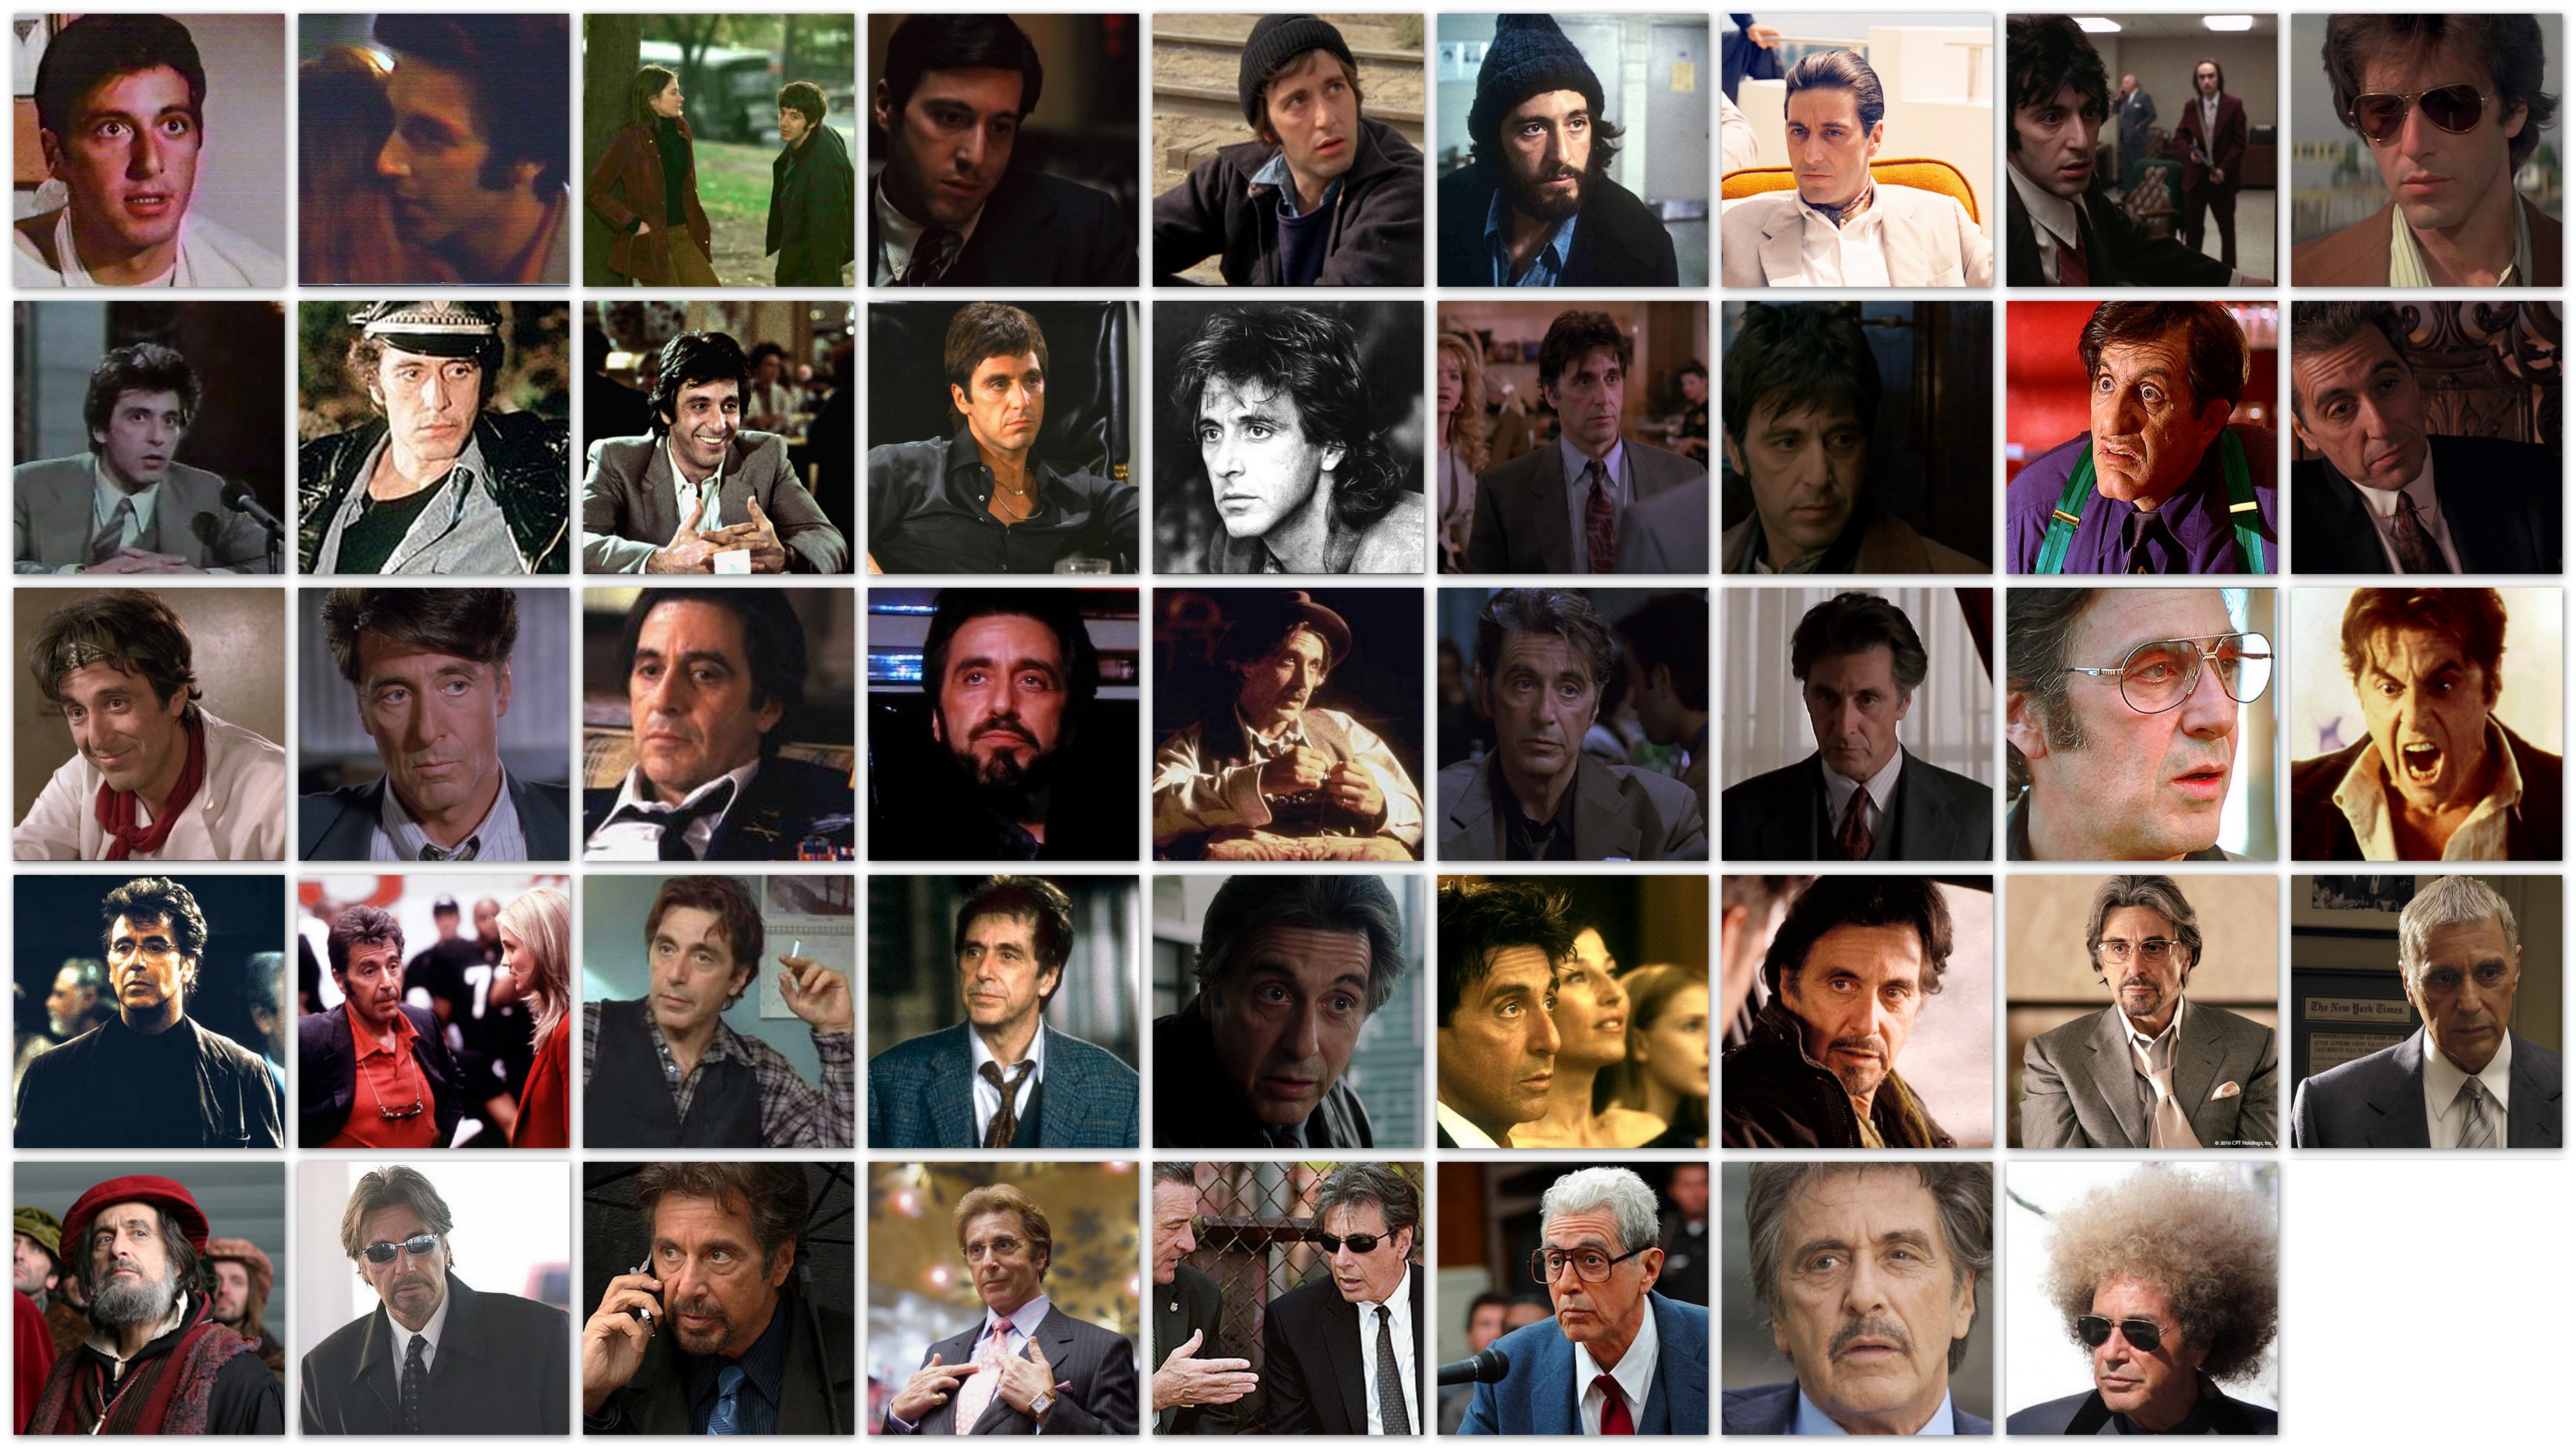 An overview of the roles of actor Al Pacino